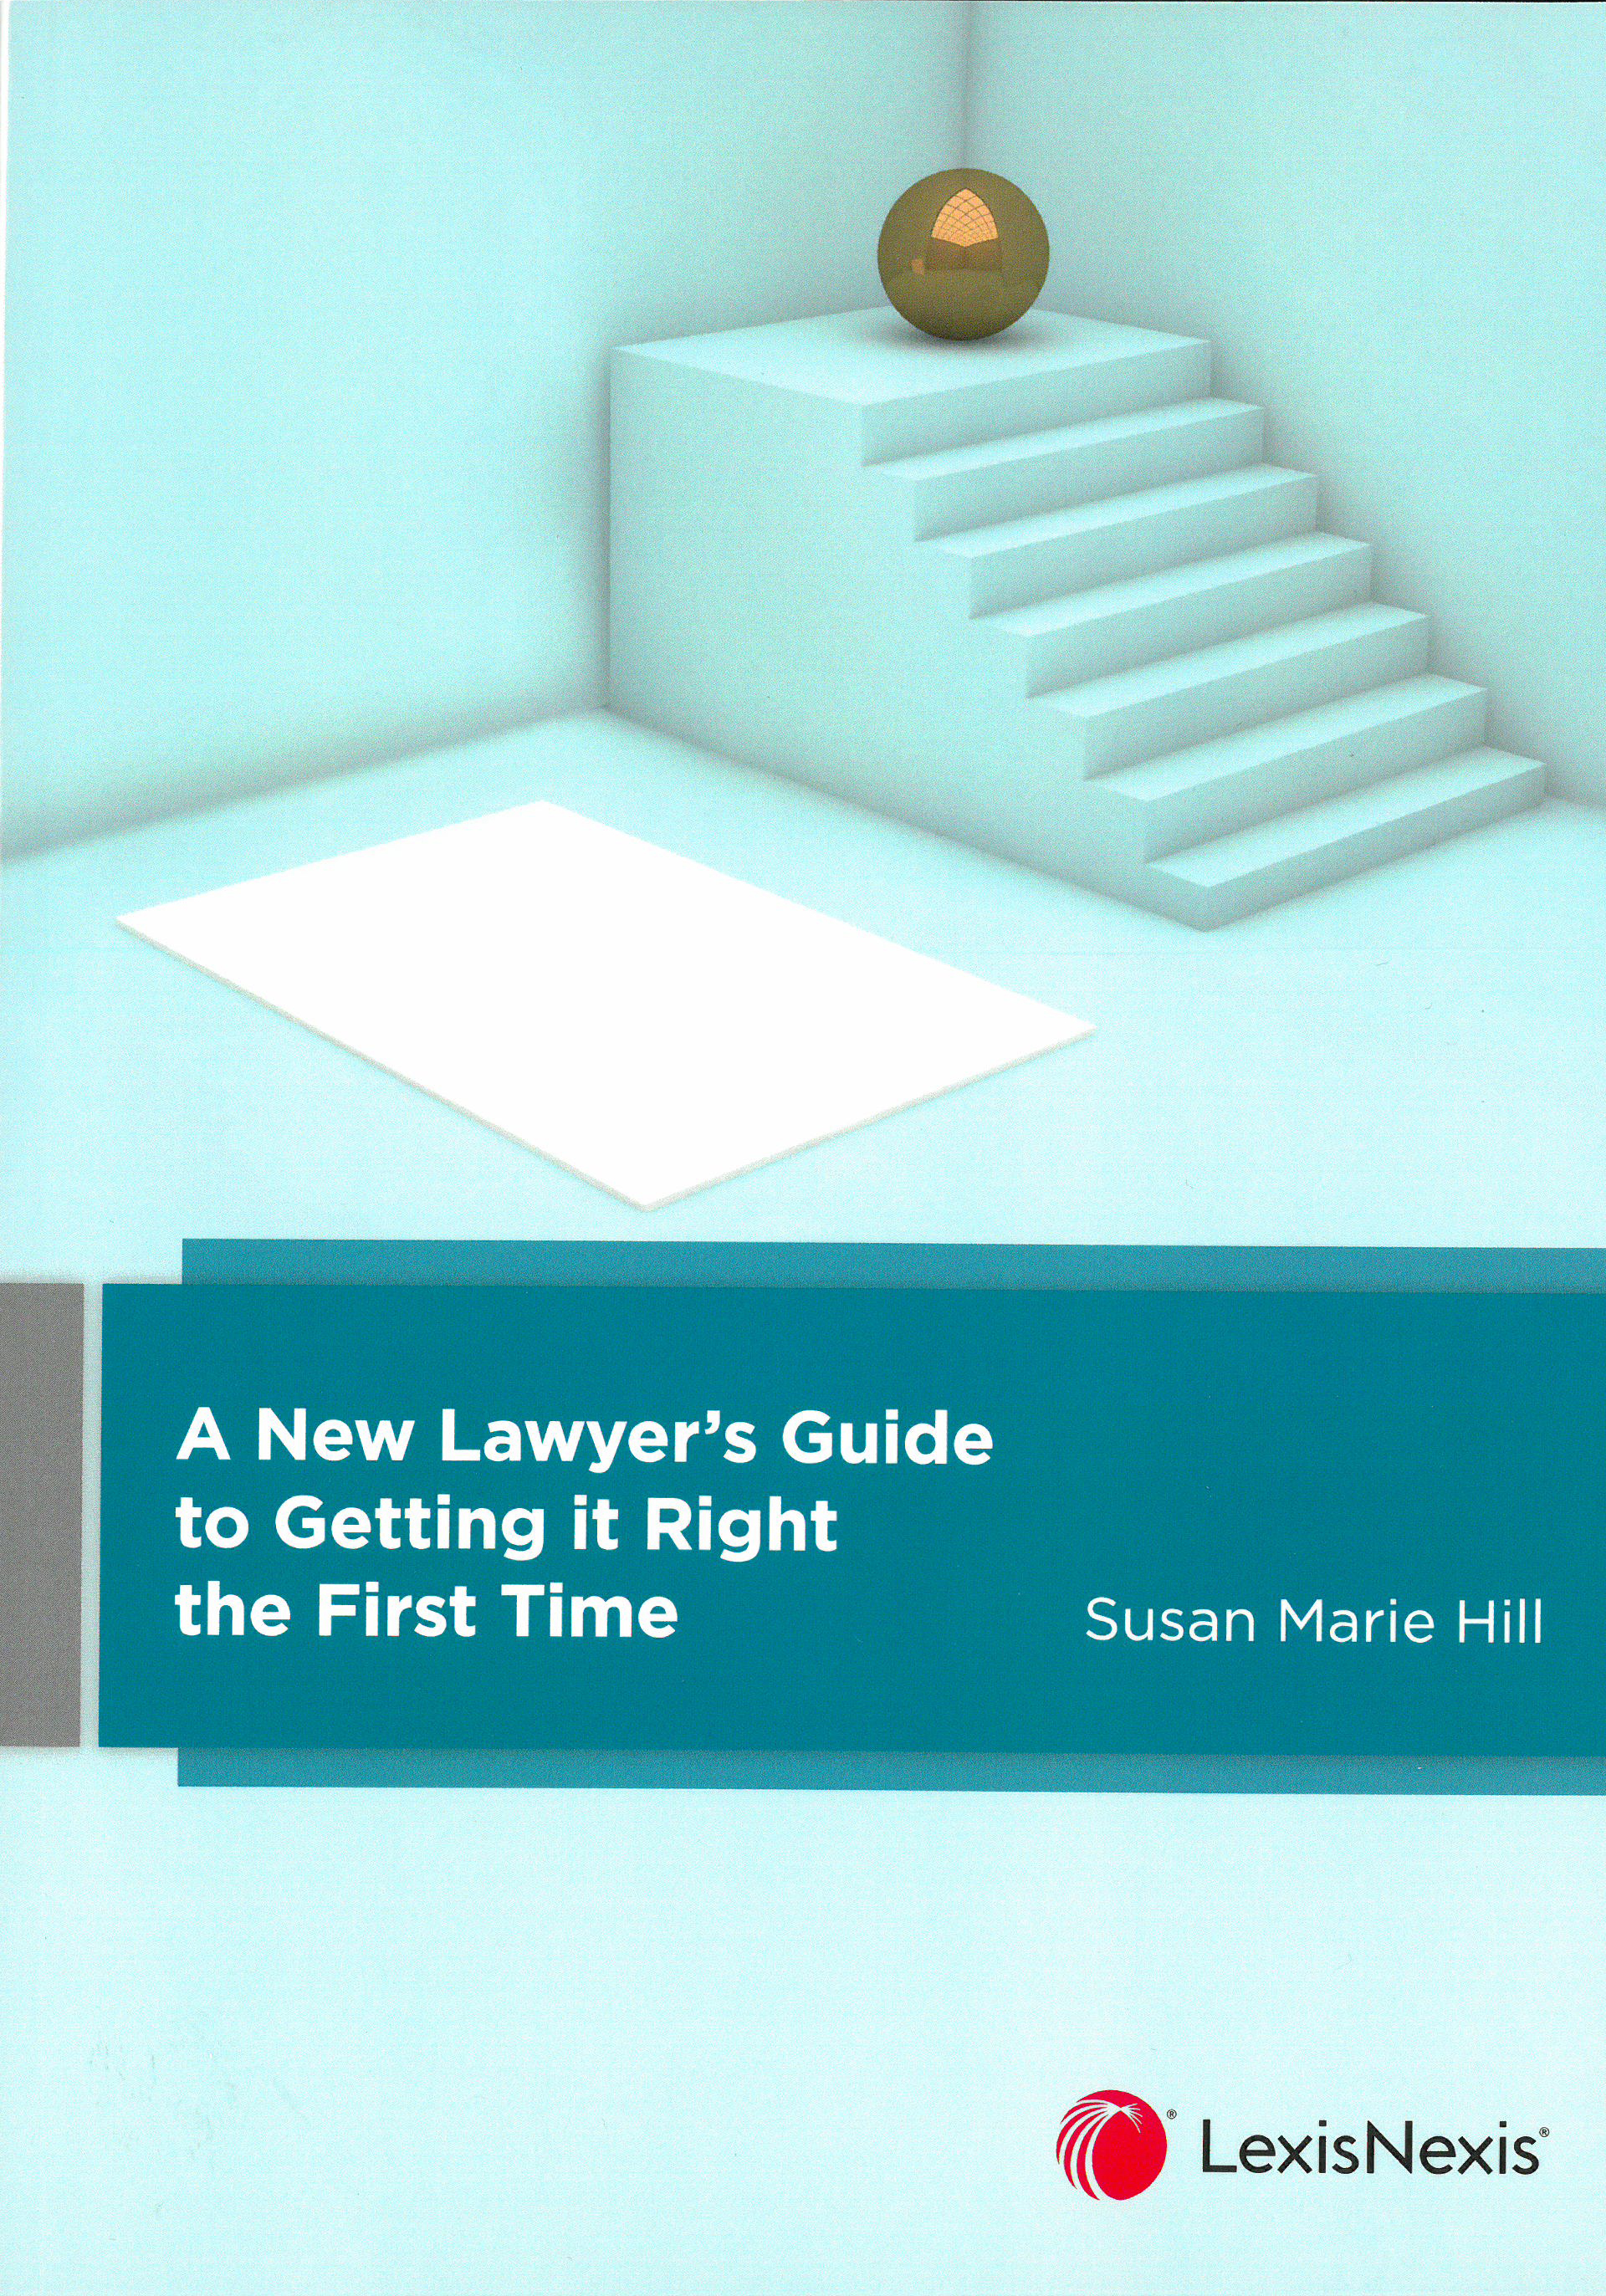 A New Lawyer's Guide to Getting it Right the First Time